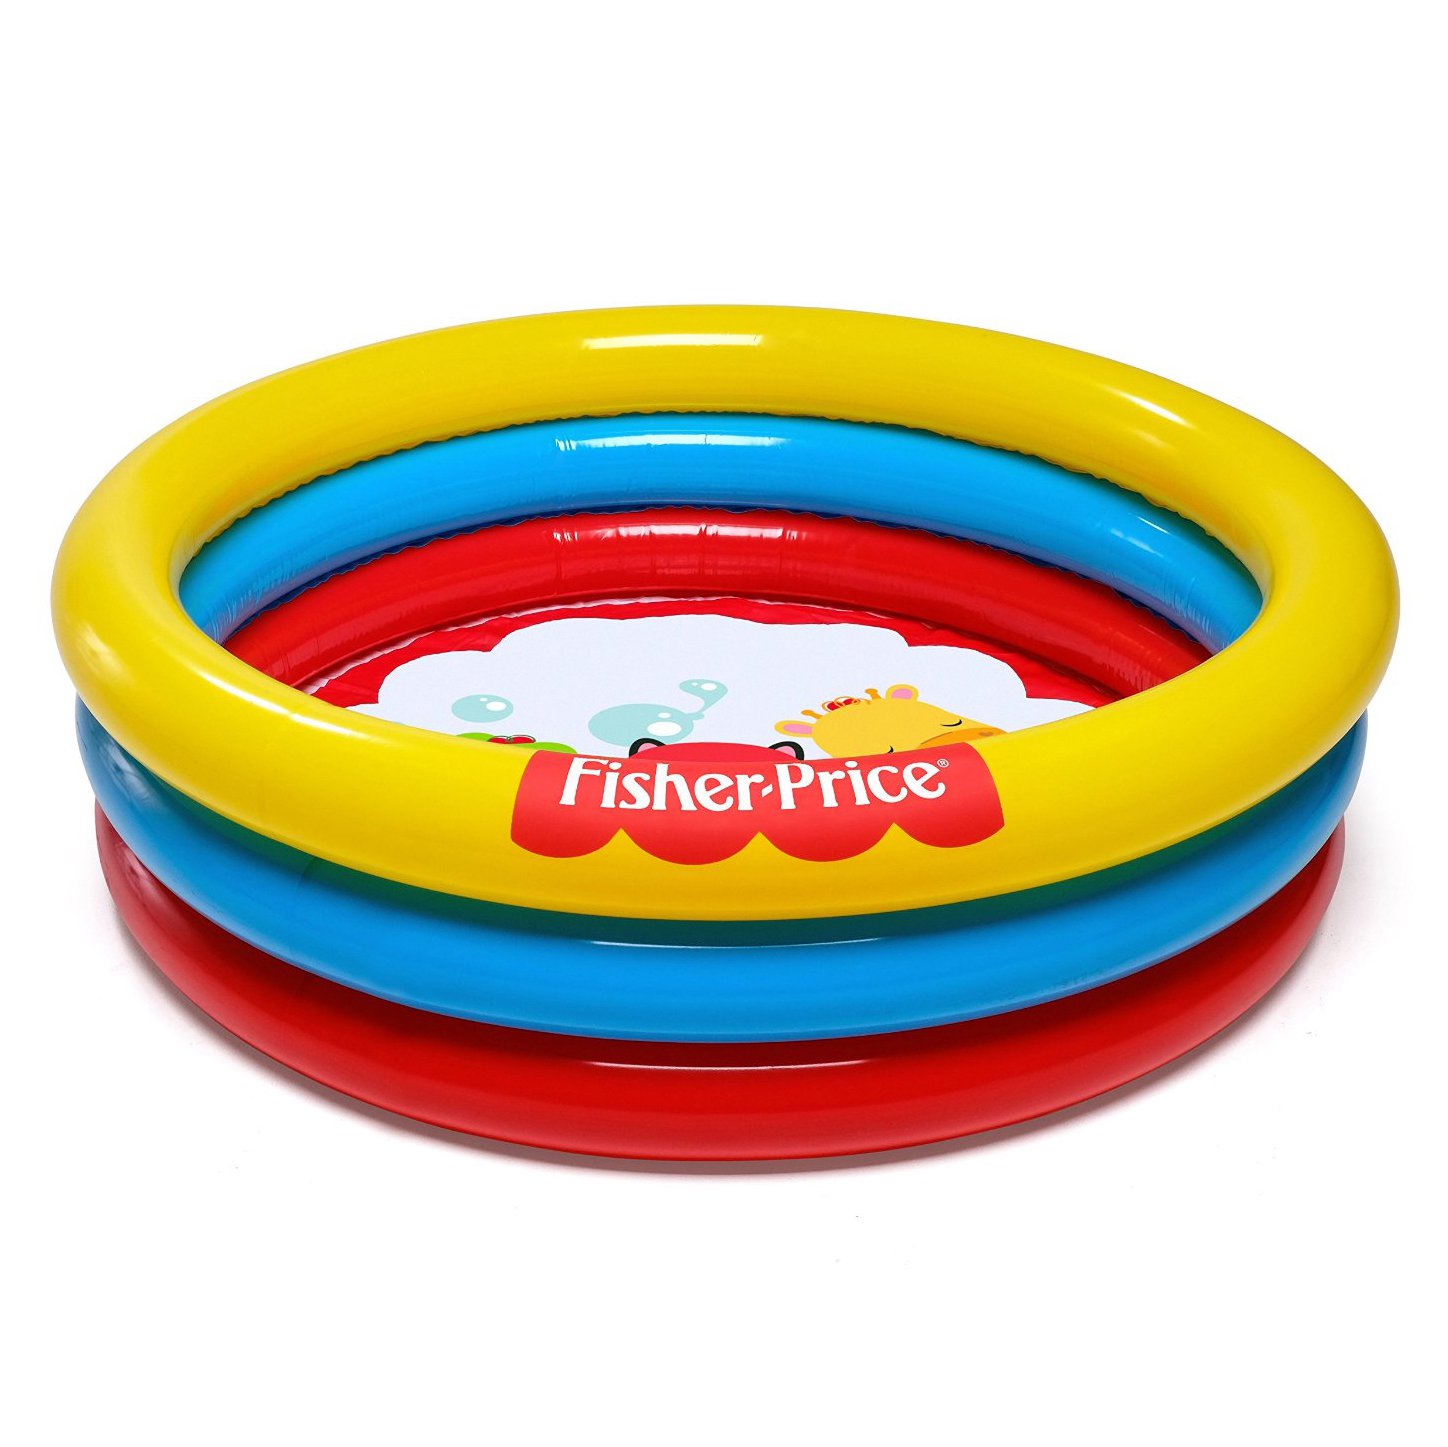 Fisher-Price 3 Ring Fun And Colorful Ball Pit Pool For Ages 2 And Up | 93501E-BW - image 1 of 5